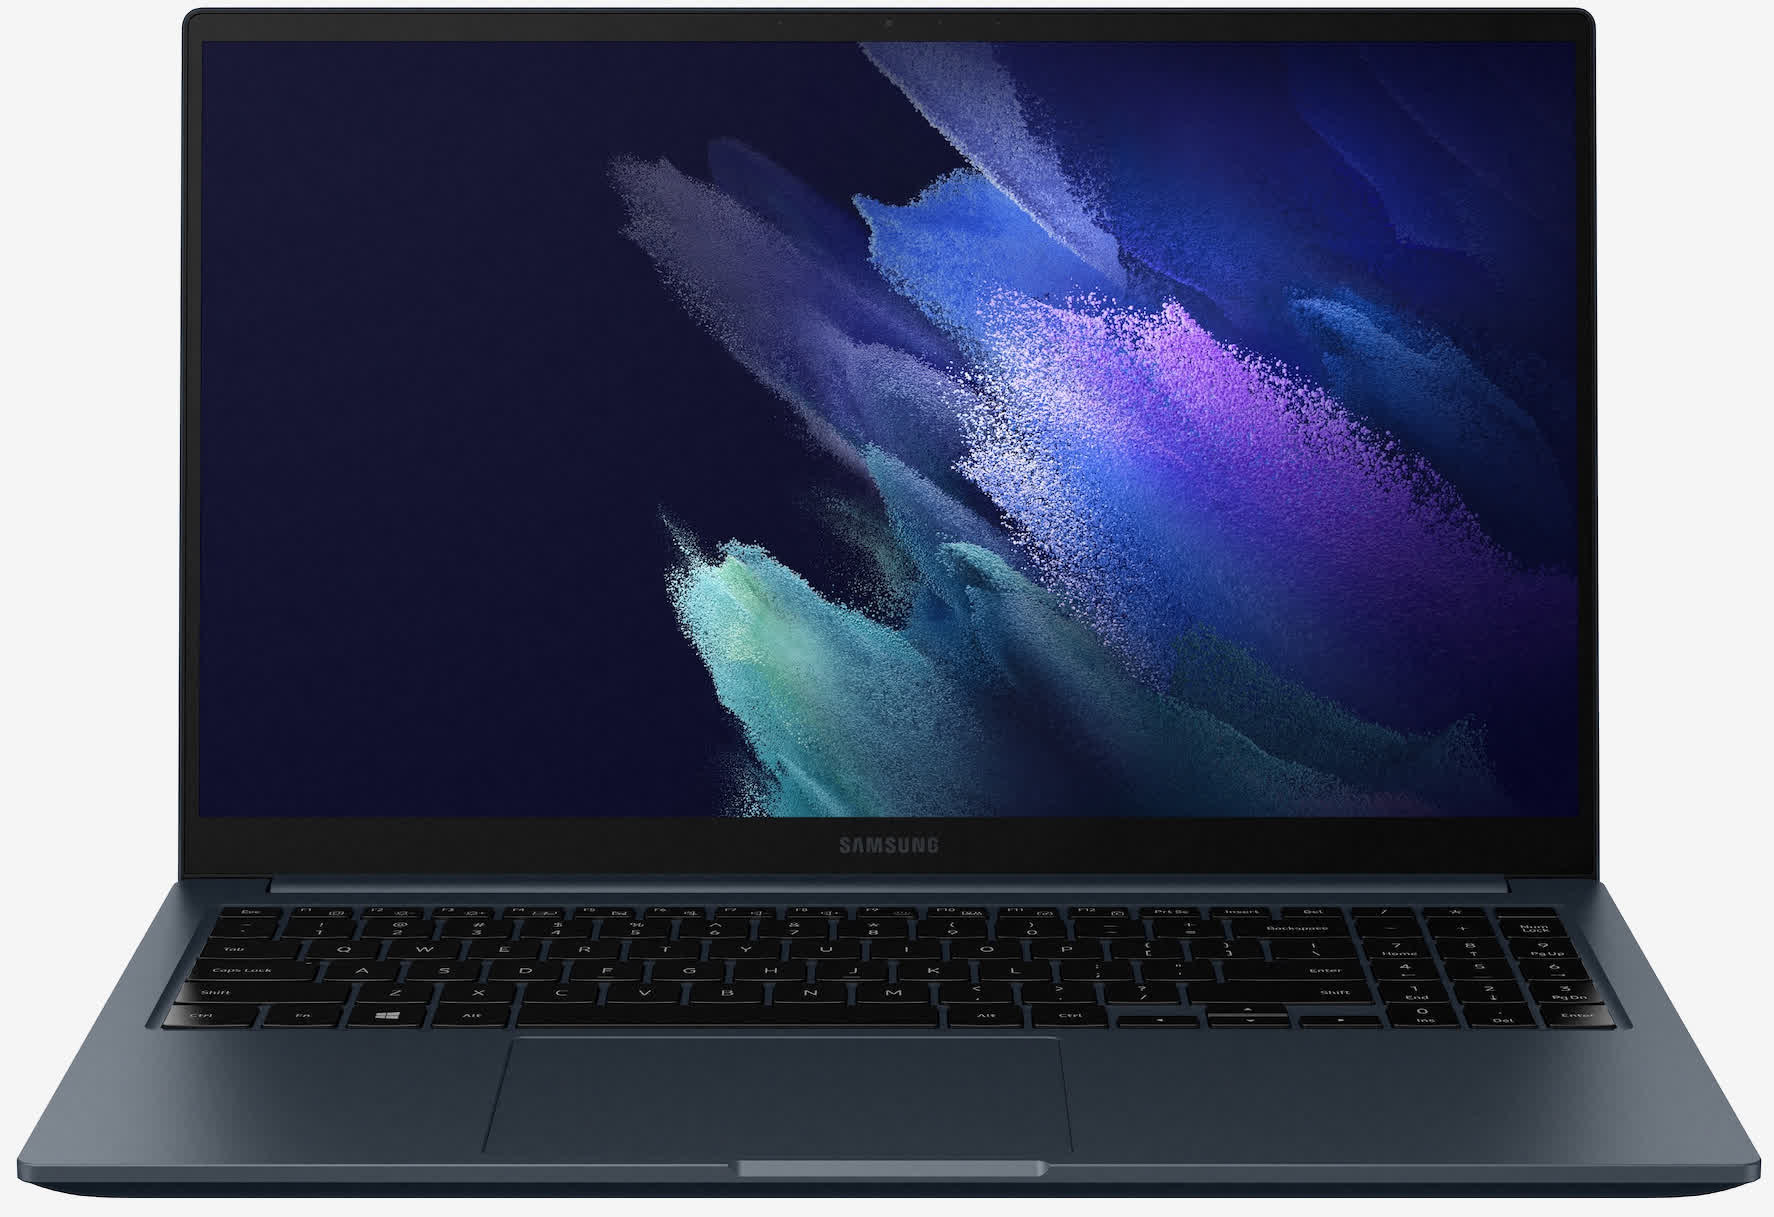 Samsung's Galaxy Book Odyssey is the world's first gaming laptop with Nvidia's RTX 3050